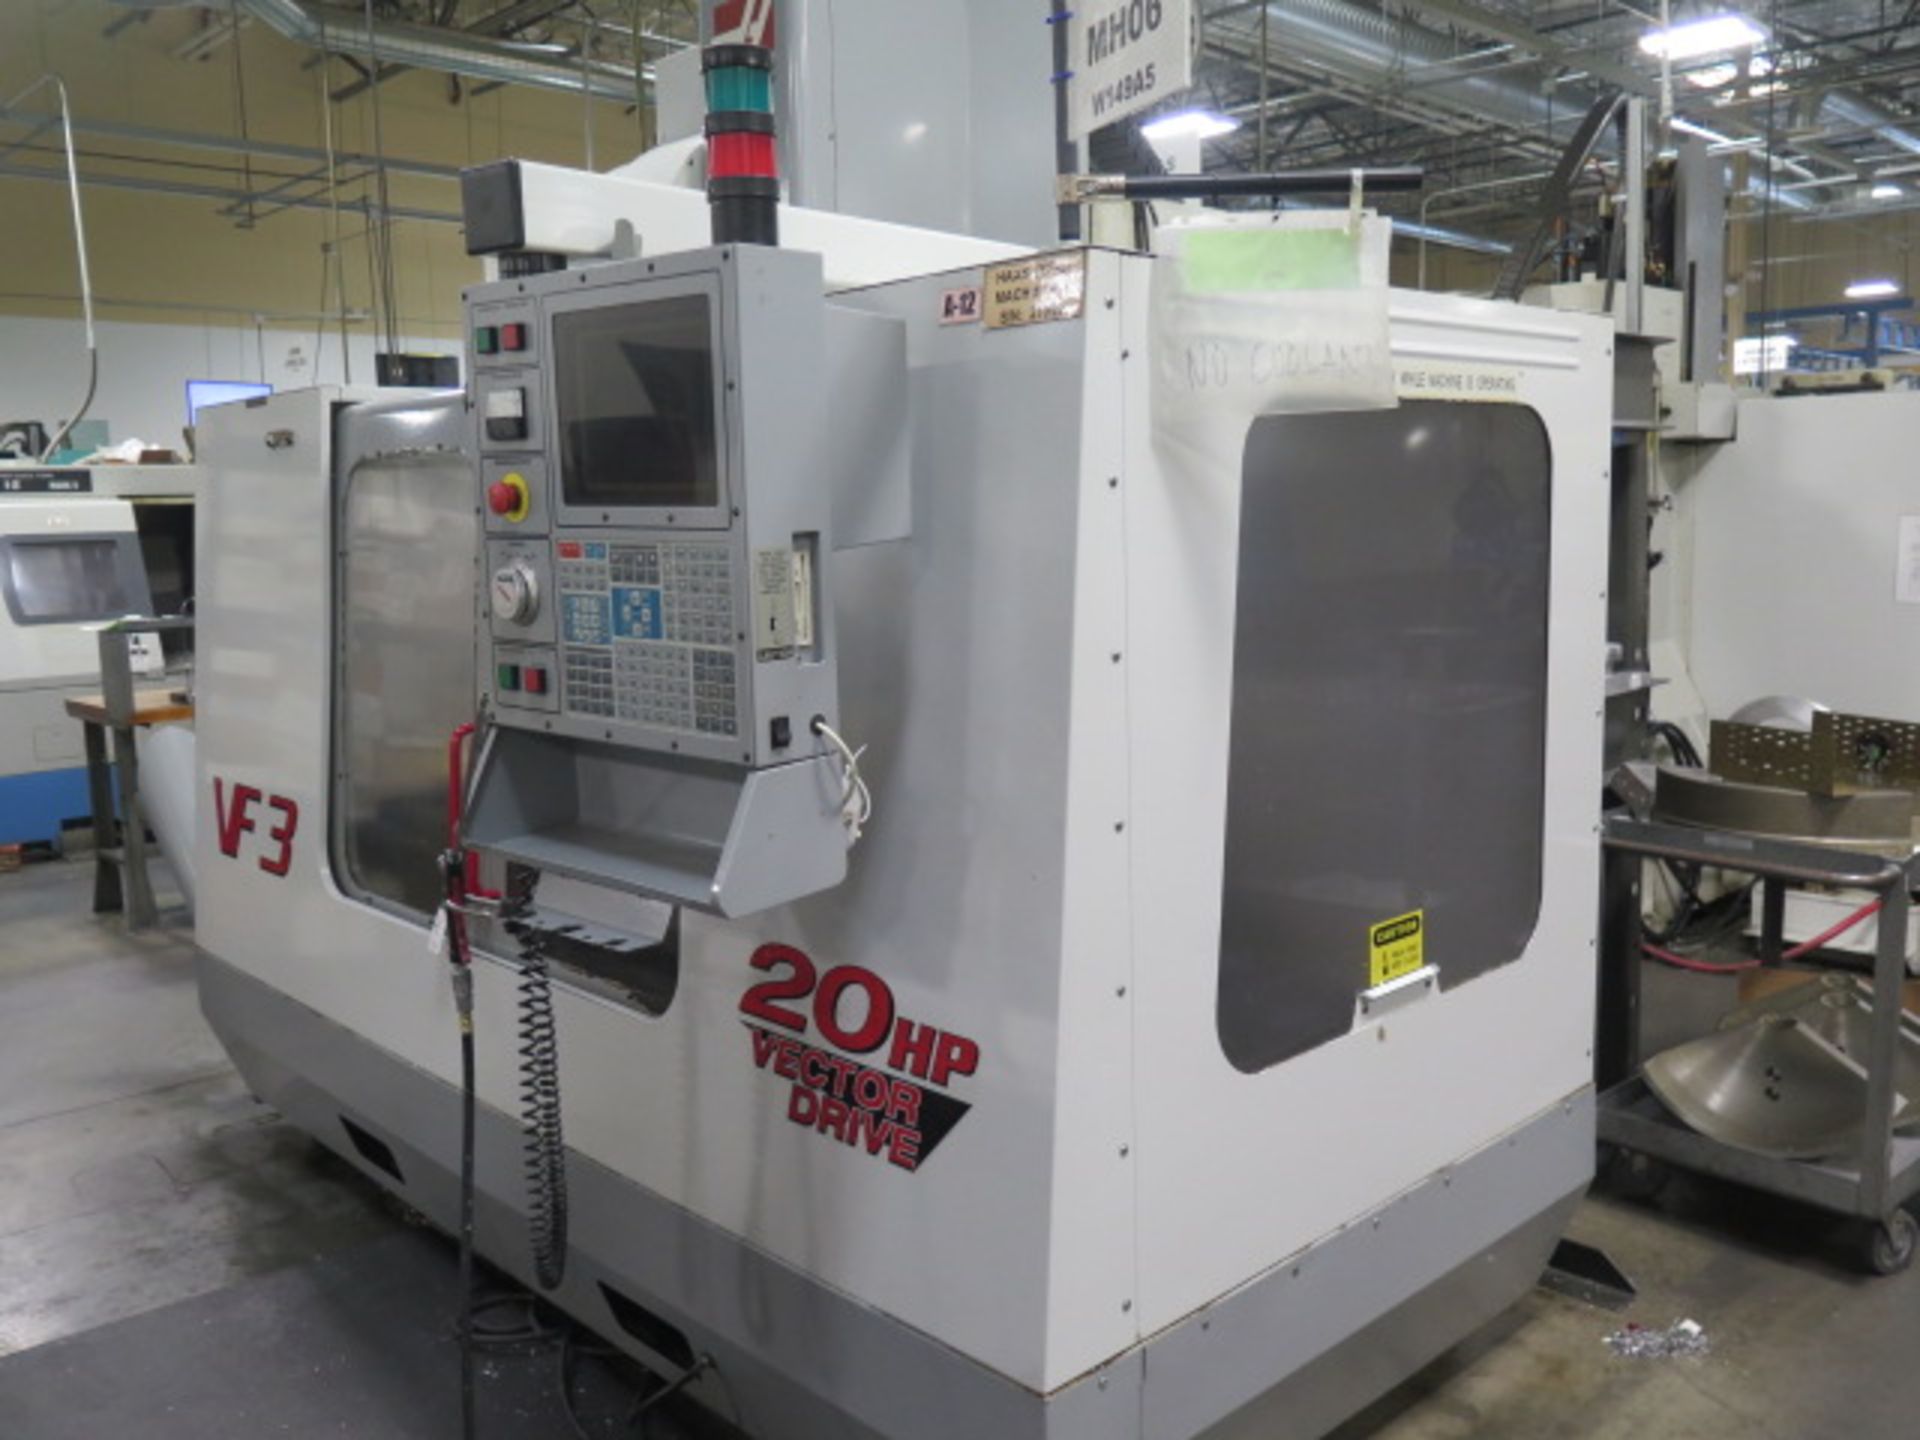 2000 Haas VF-3 4-Axis CNC Vertical Machining Center s/n 21059 w/ Haas Controls, 24-Station Side Mou - Image 2 of 19